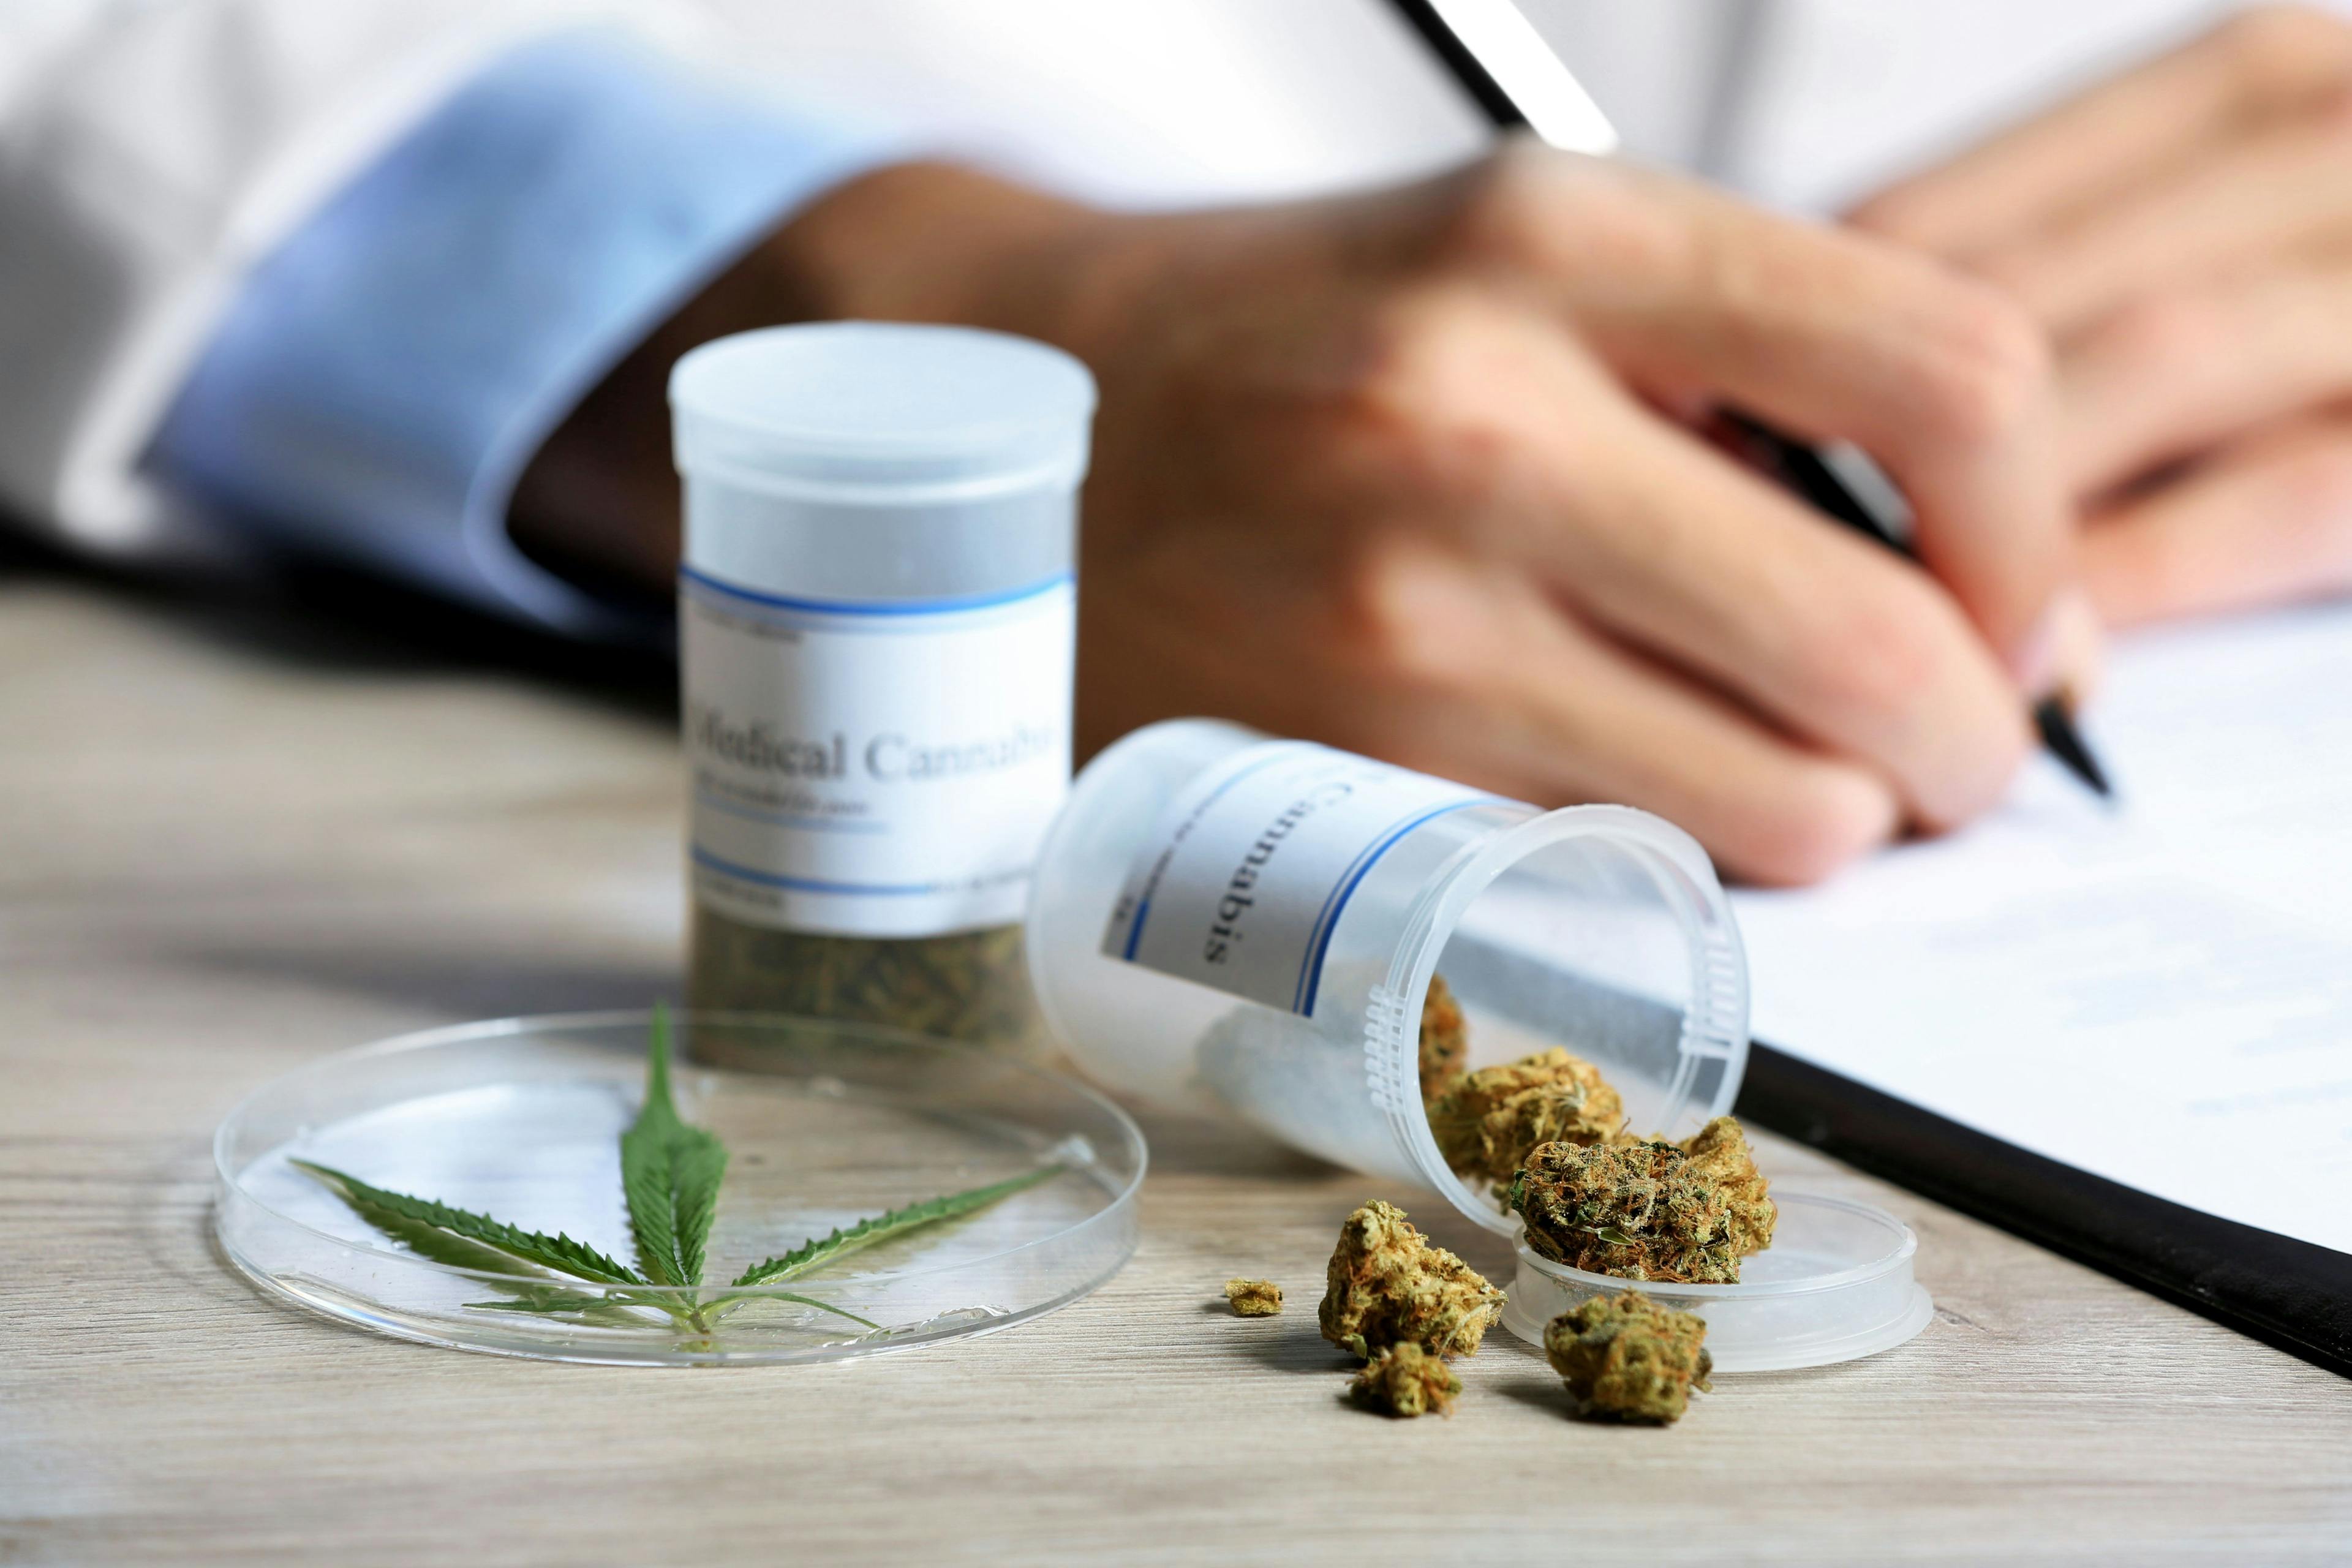 What’s a rheumatologist to do in the absence of clinical guidelines for cannabis?